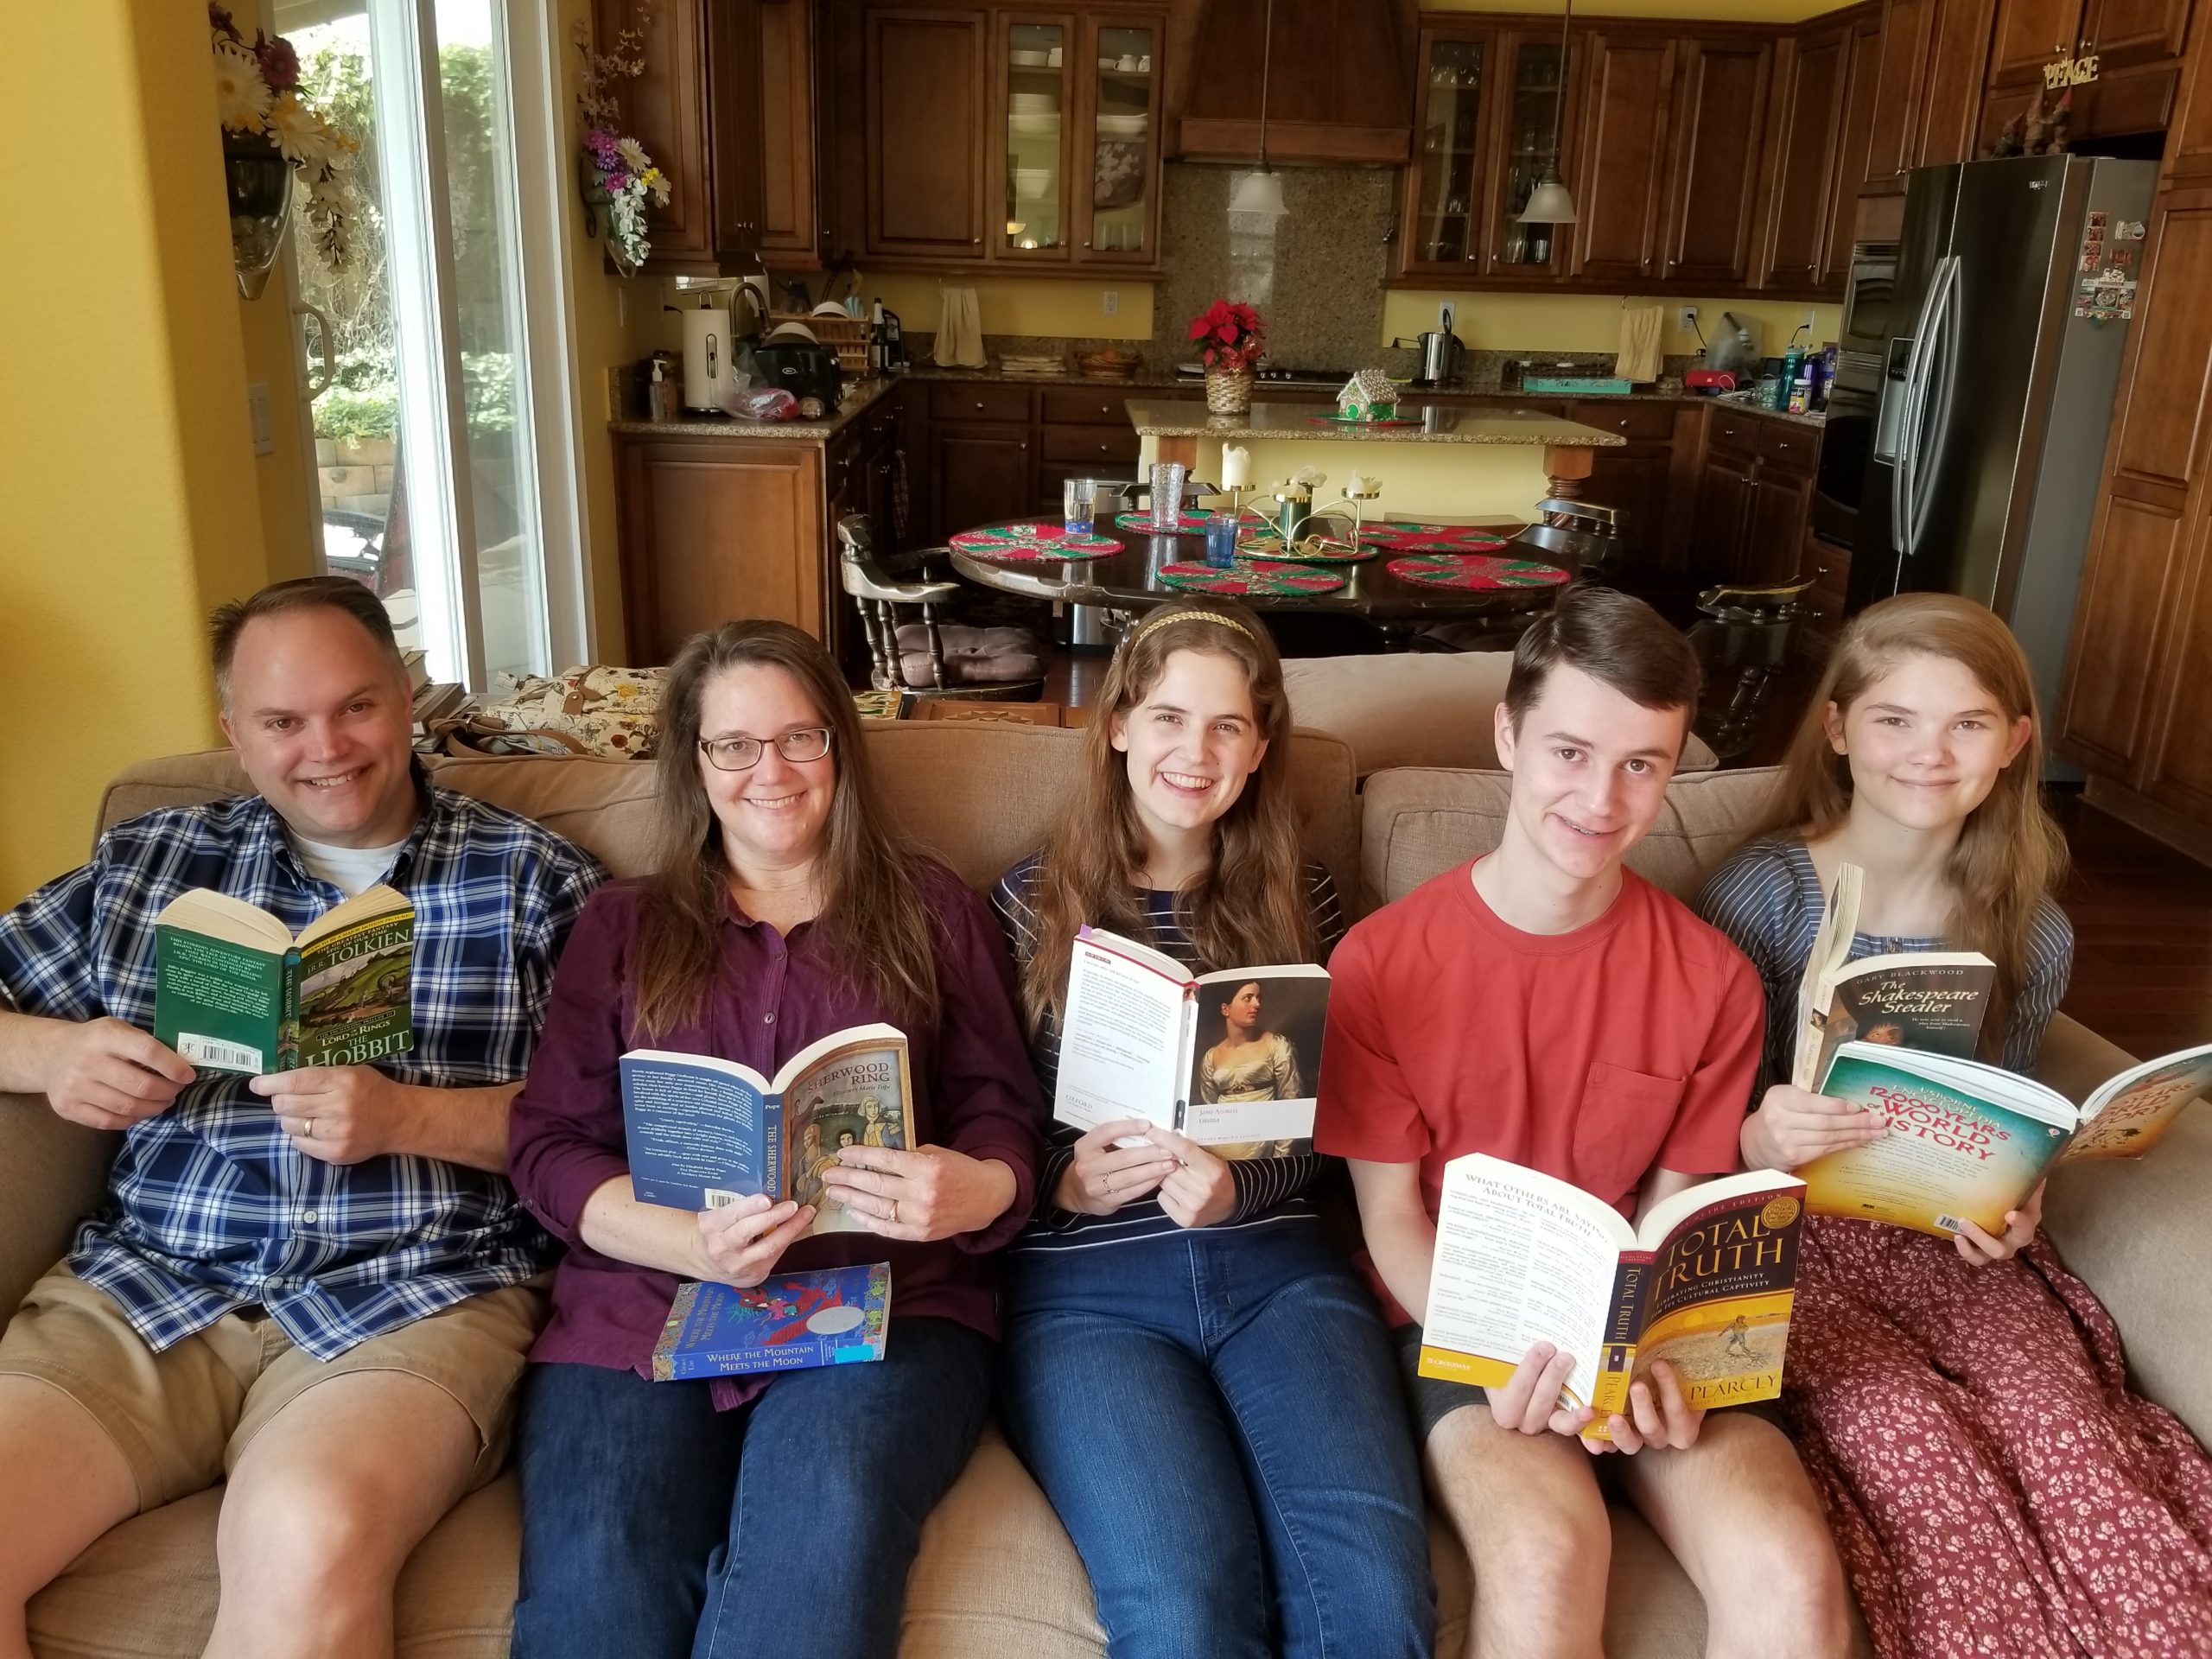 Jensen Family reading on couch